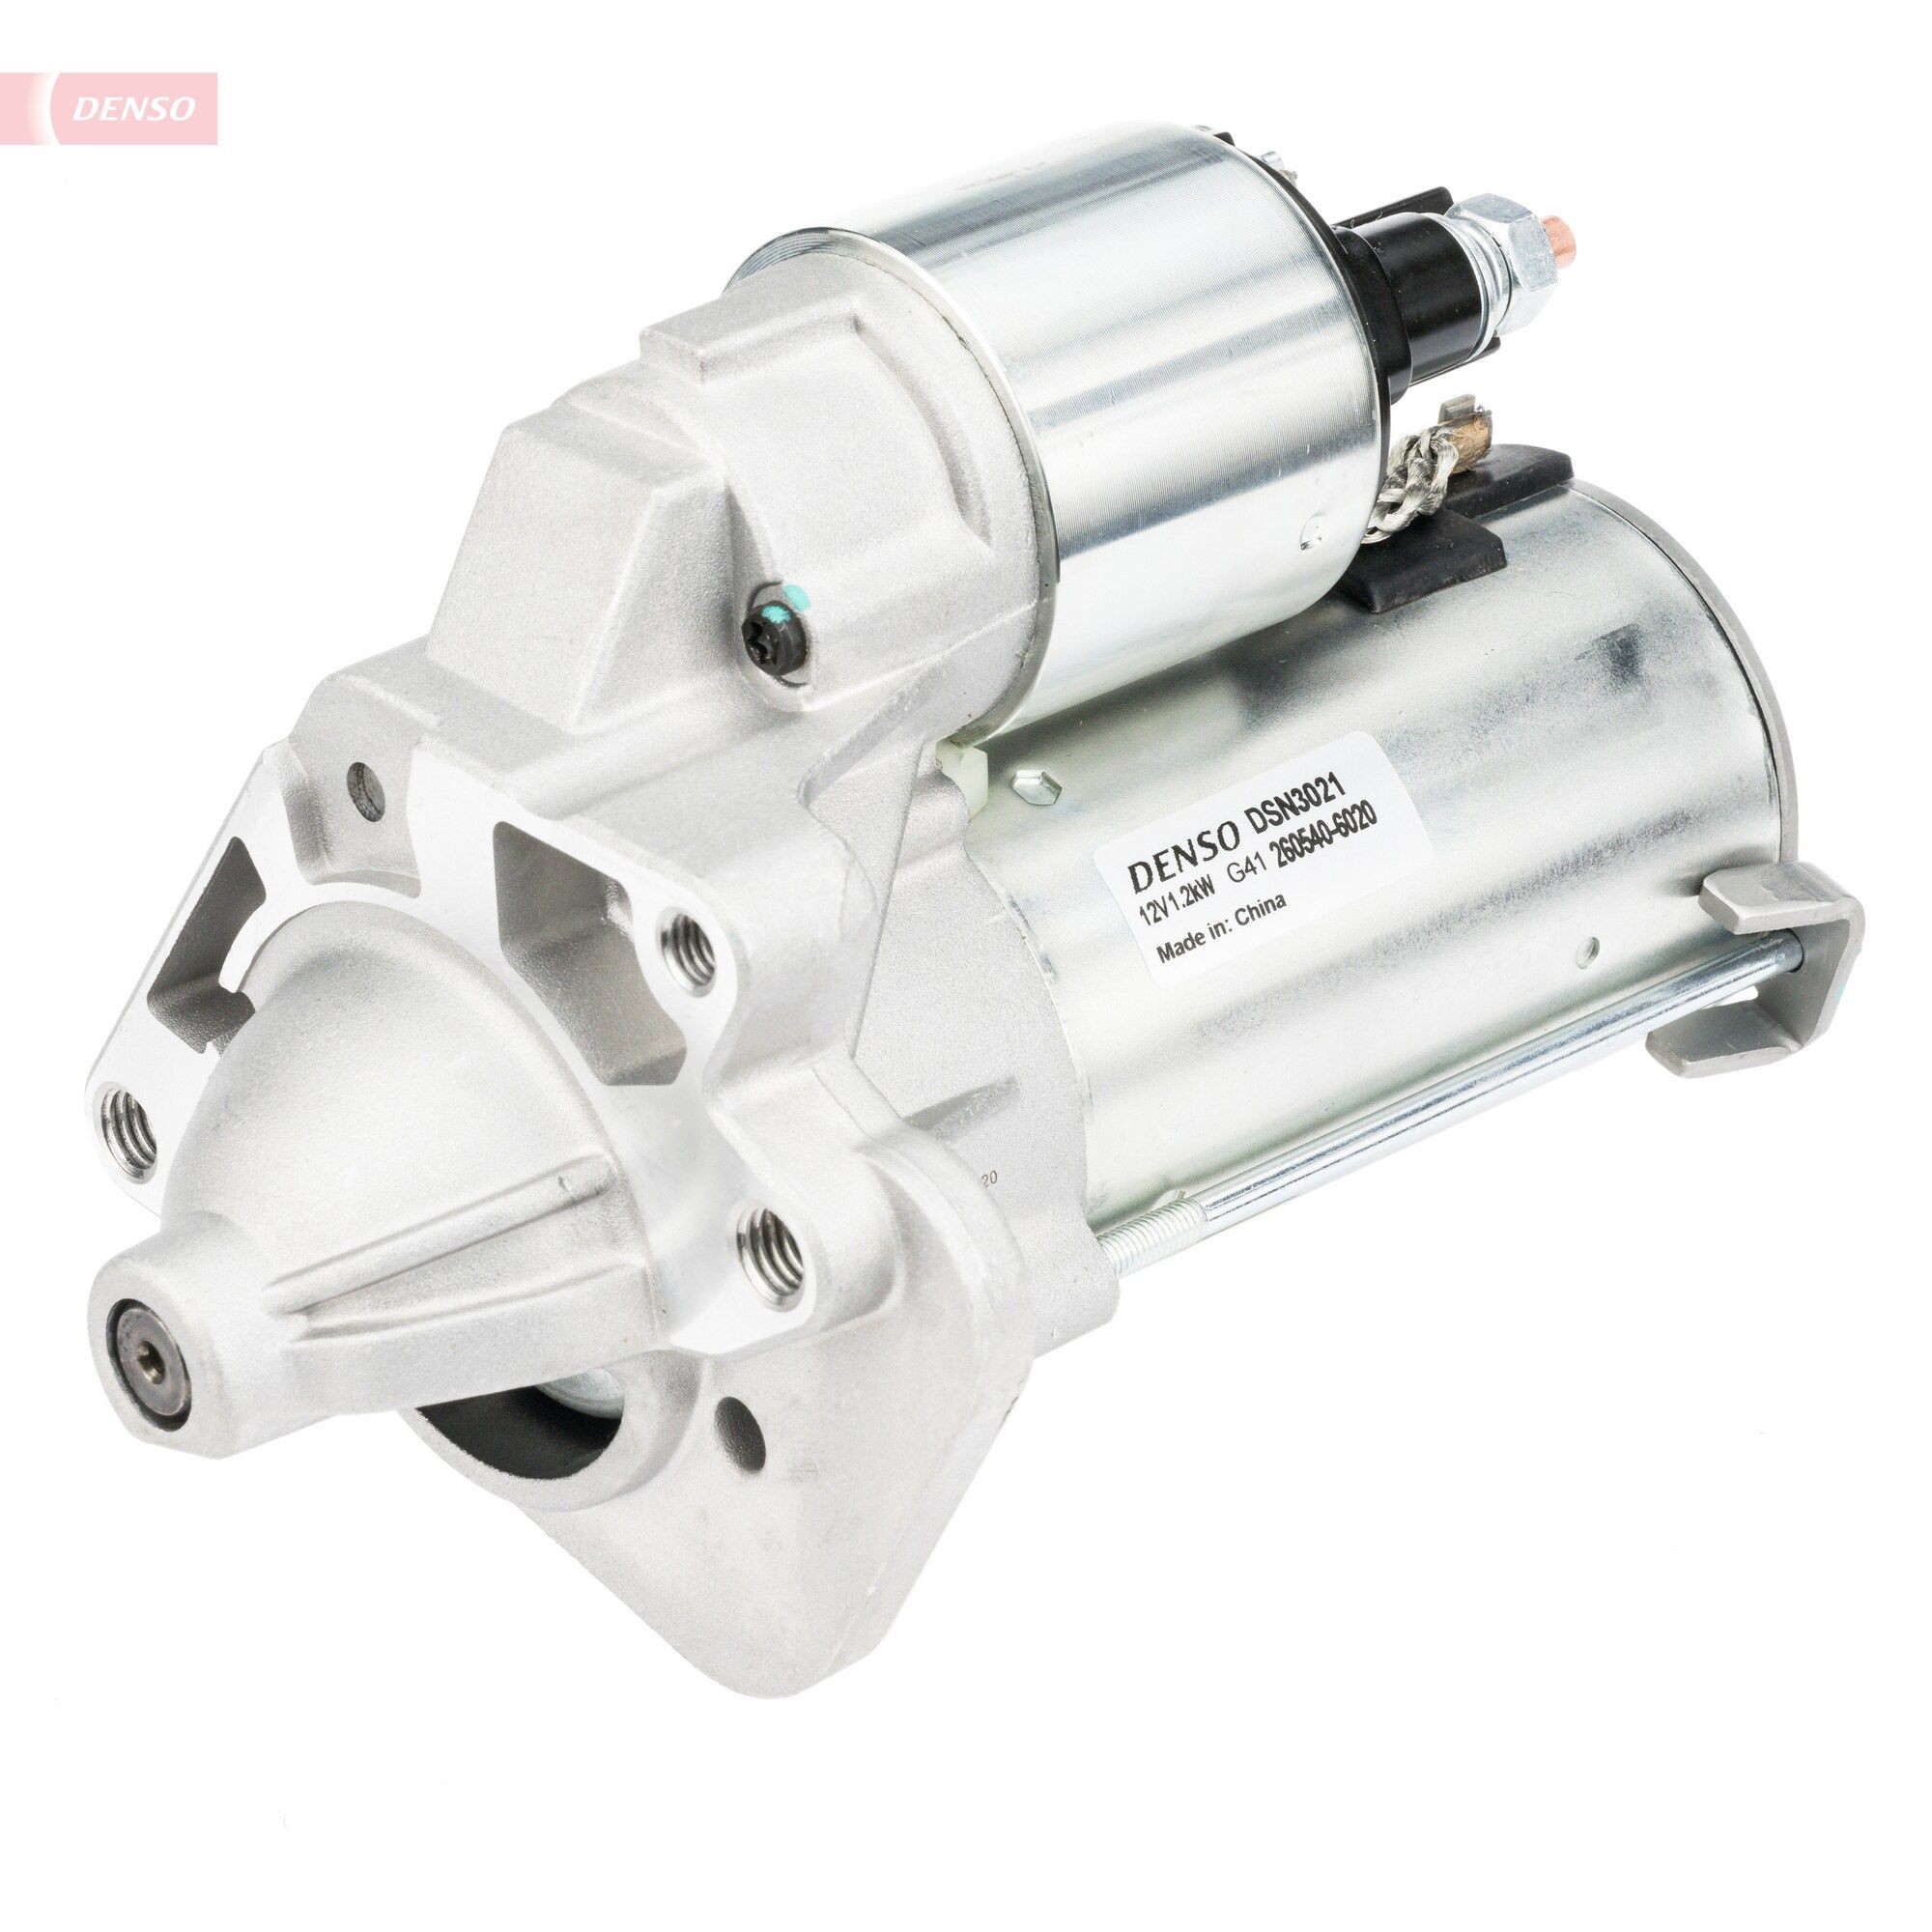 DENSO DSN3021 Starter motor MERCEDES-BENZ experience and price